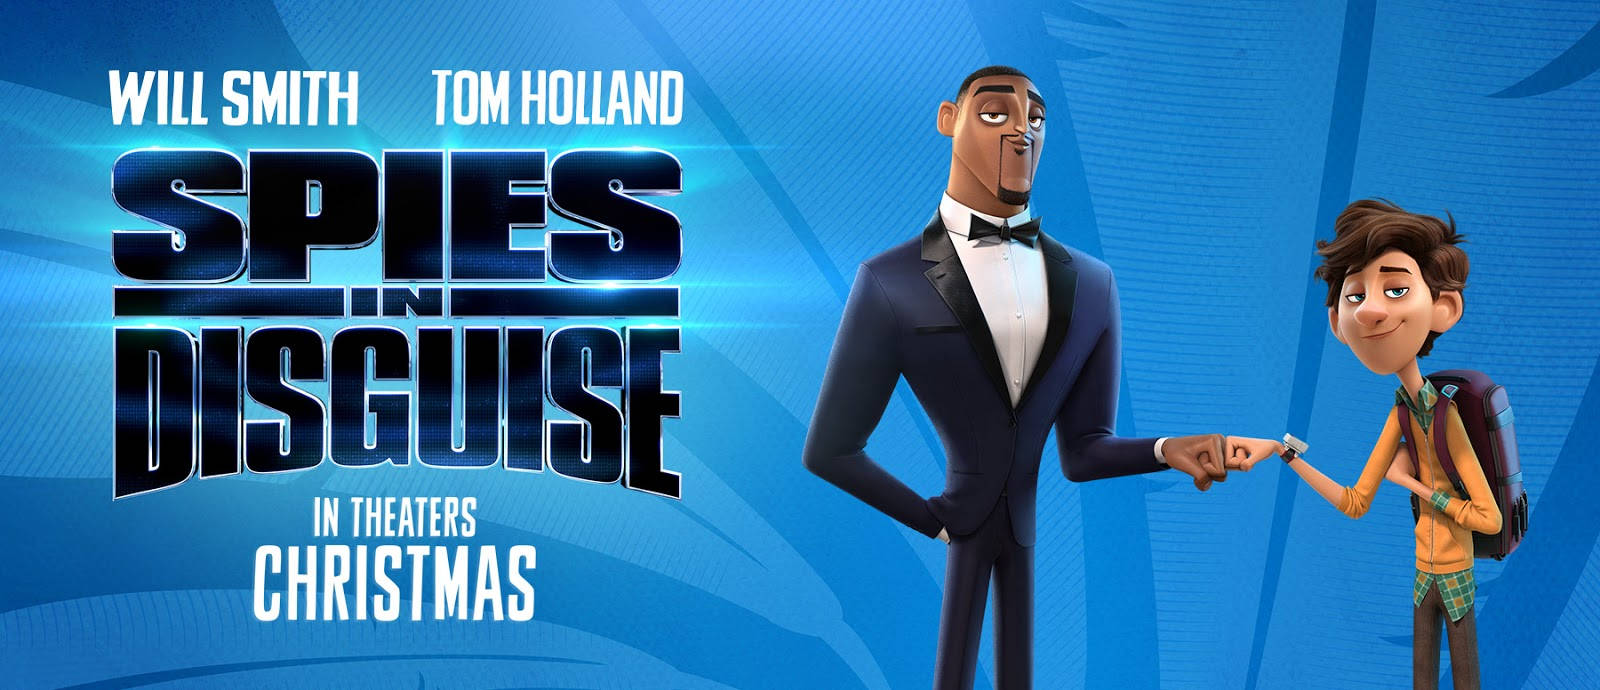 Spies In Disguise In Theaters Christmas Wallpaper